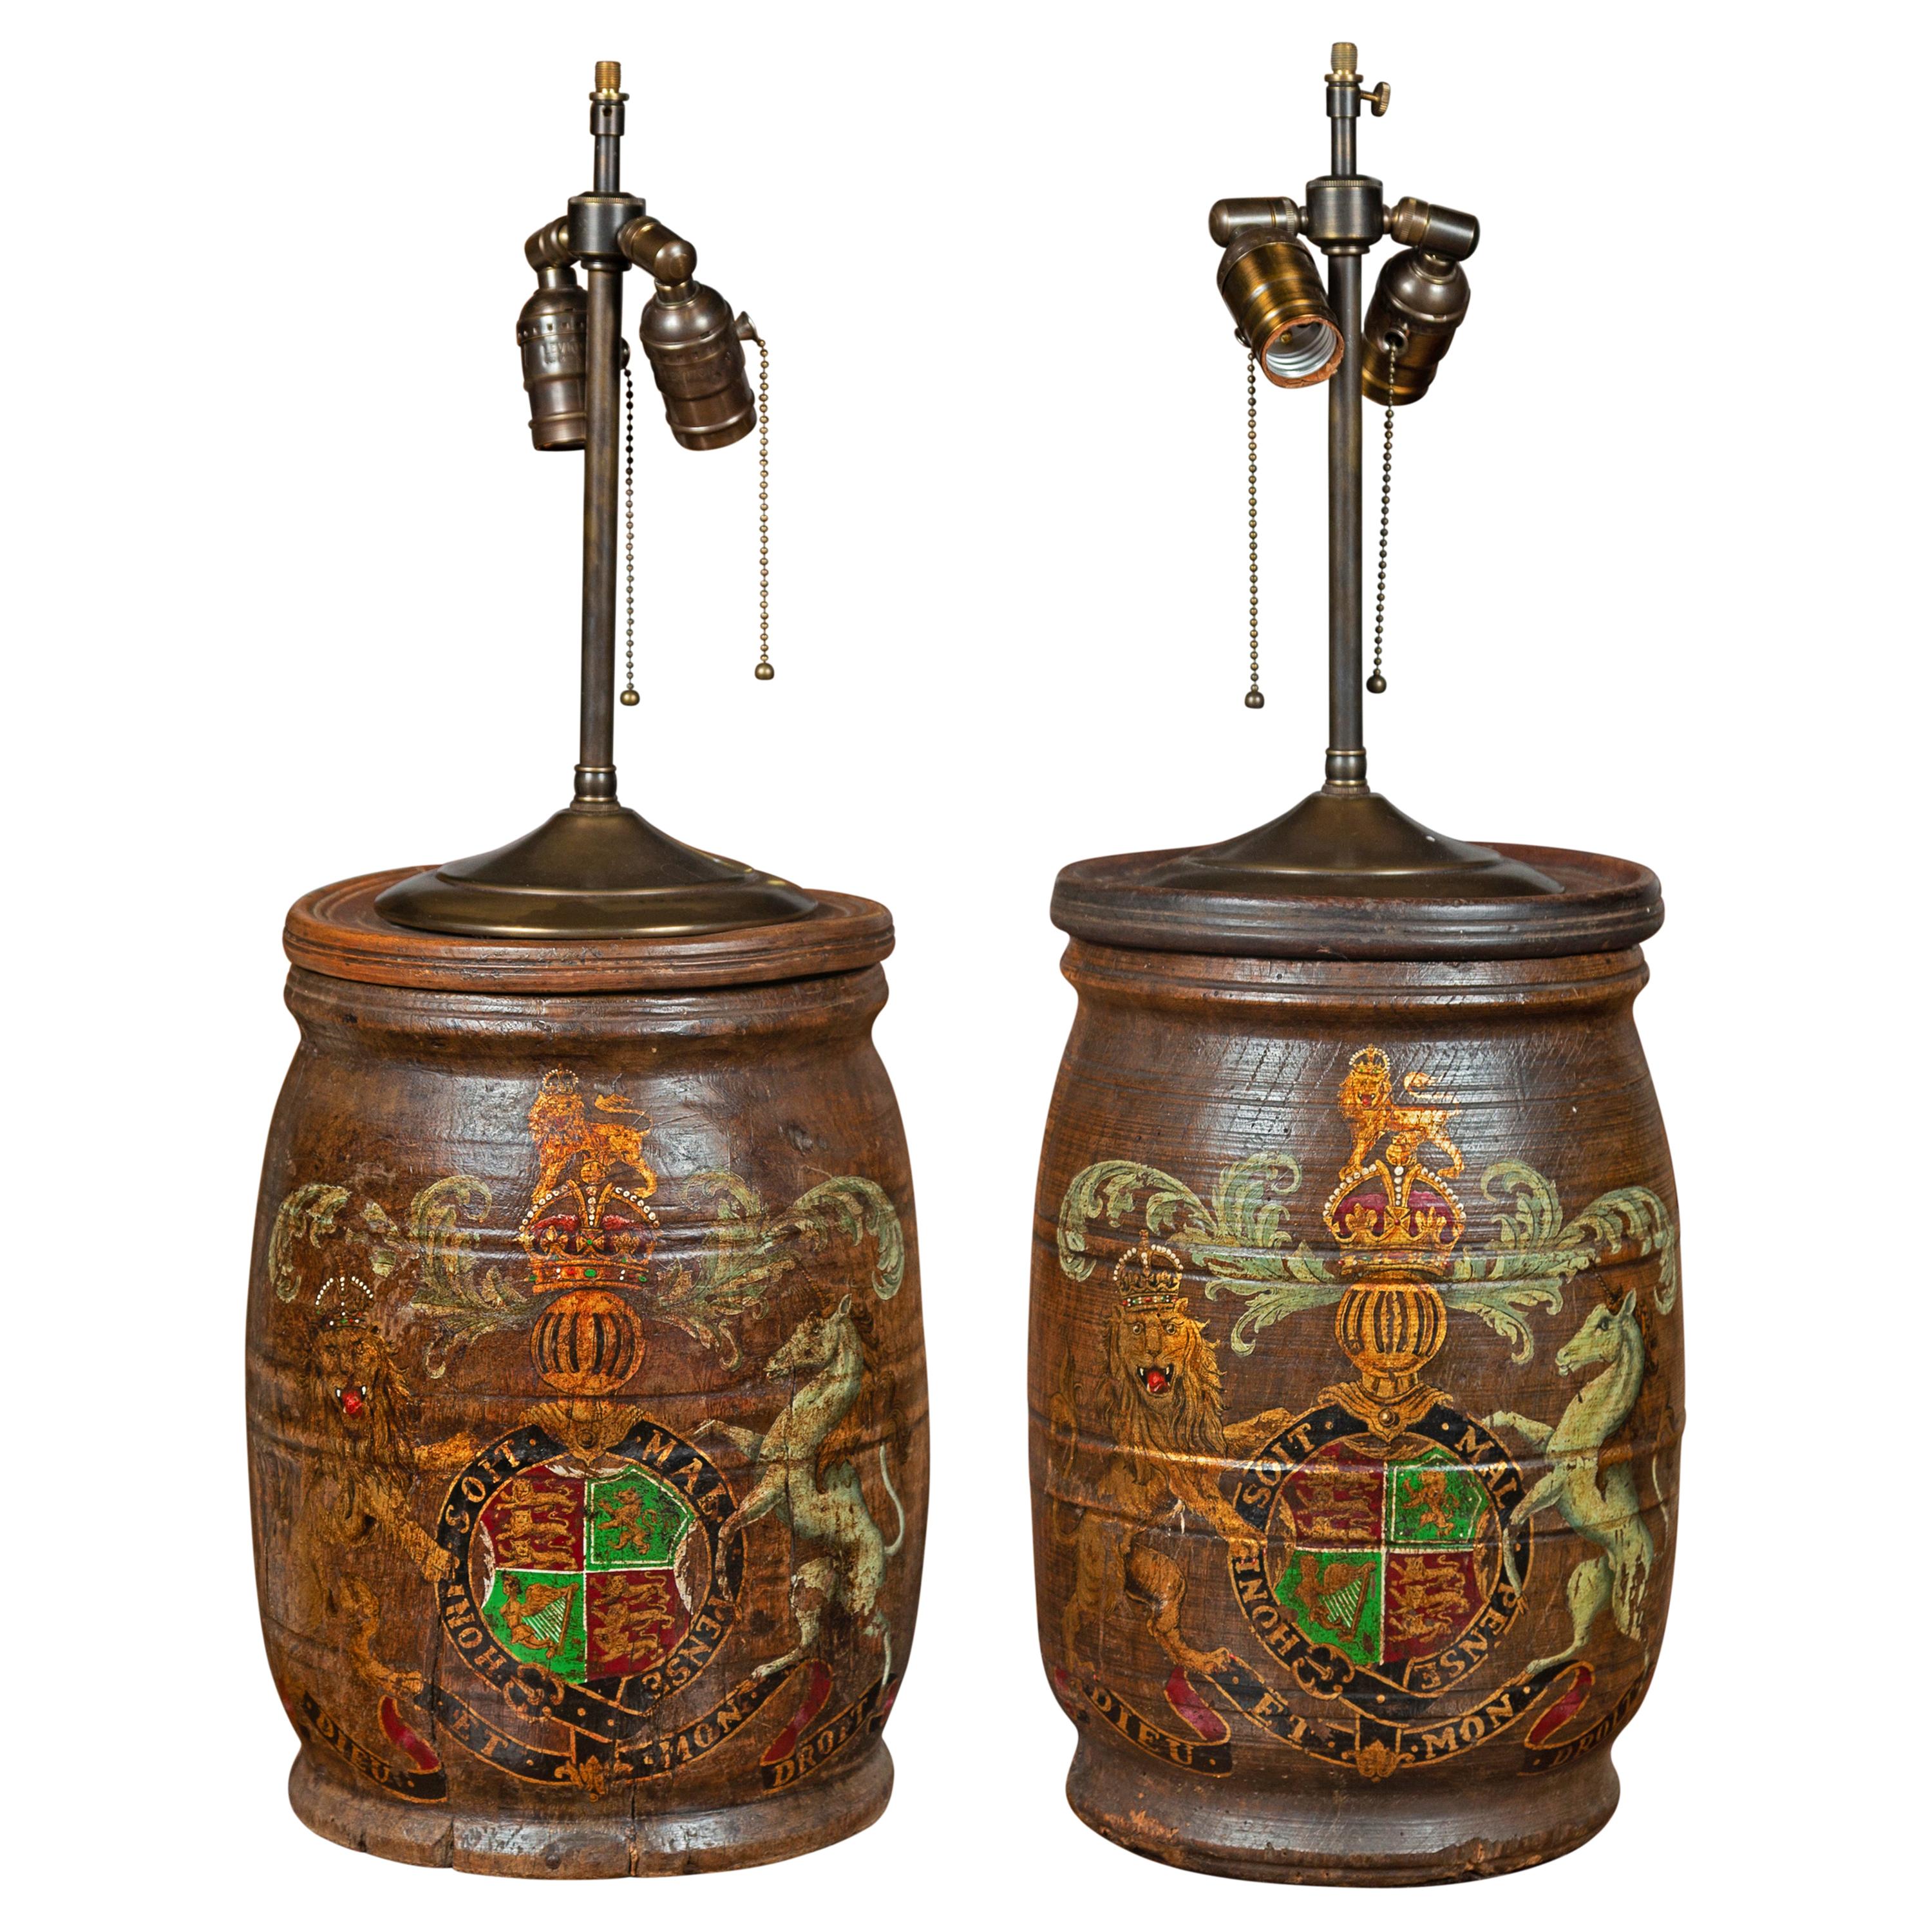 Pair of English 1880s Wooden Barrels with Coat of Arms Made into Table Lamps